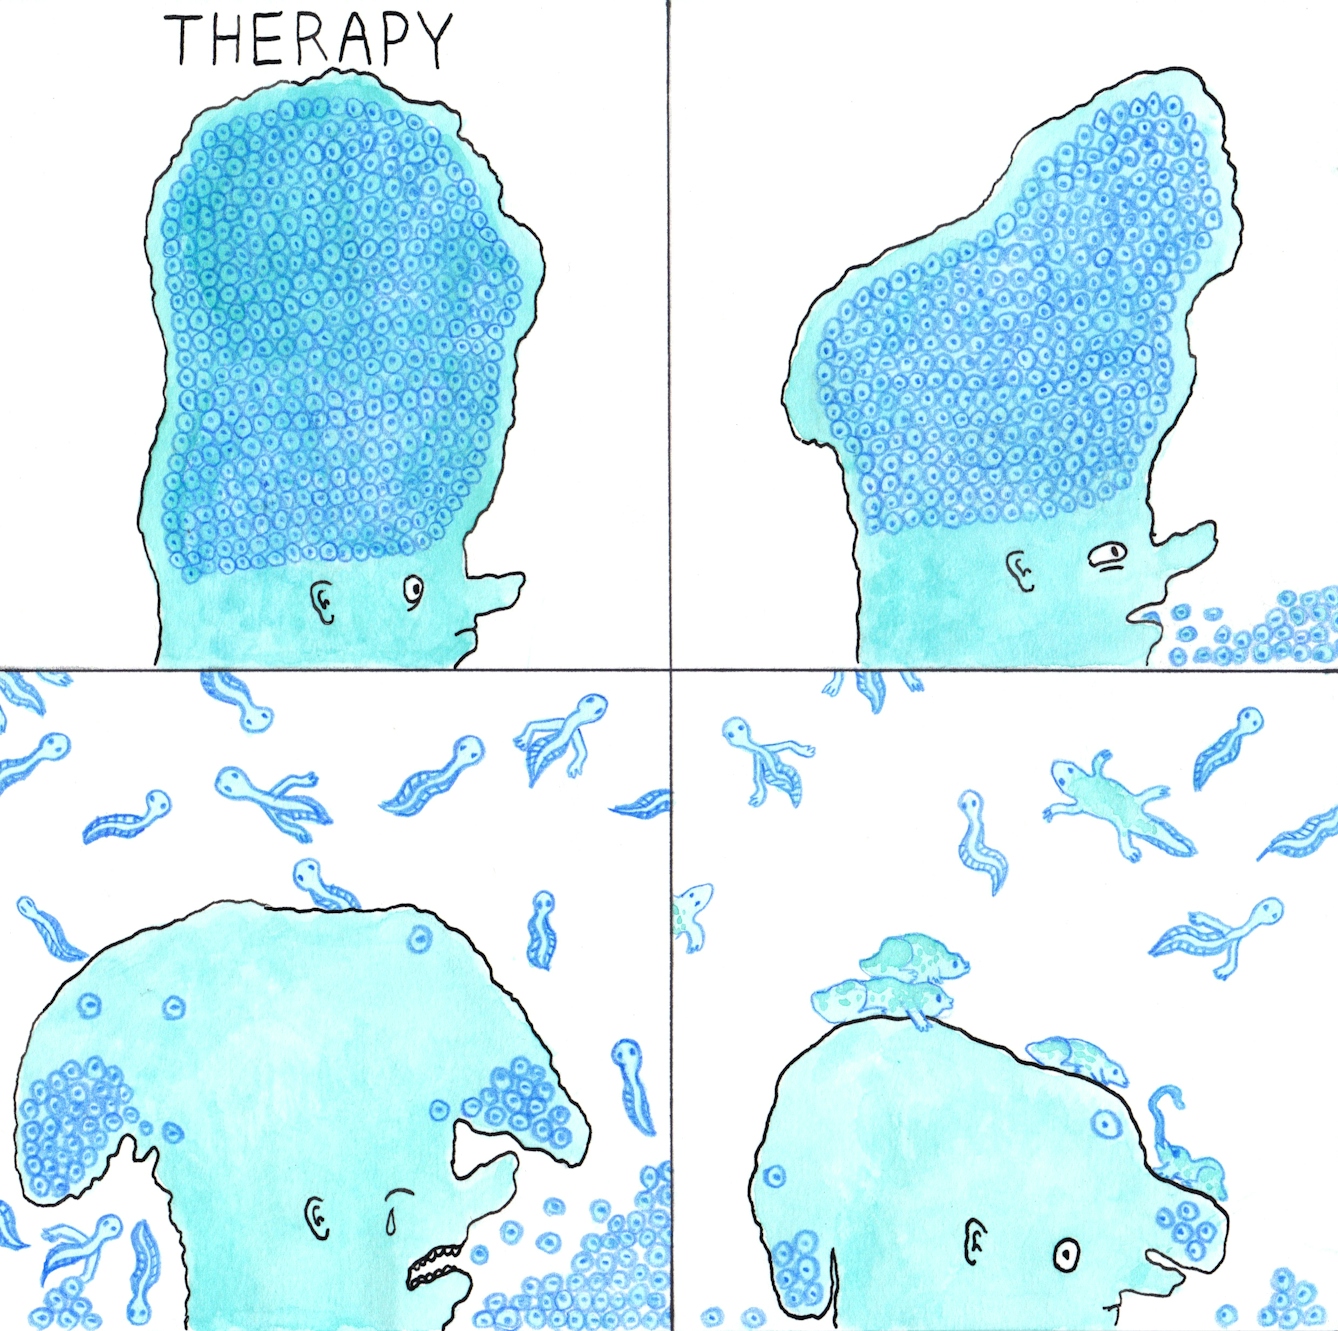 Therapy: A webcomic by Rob Bidder